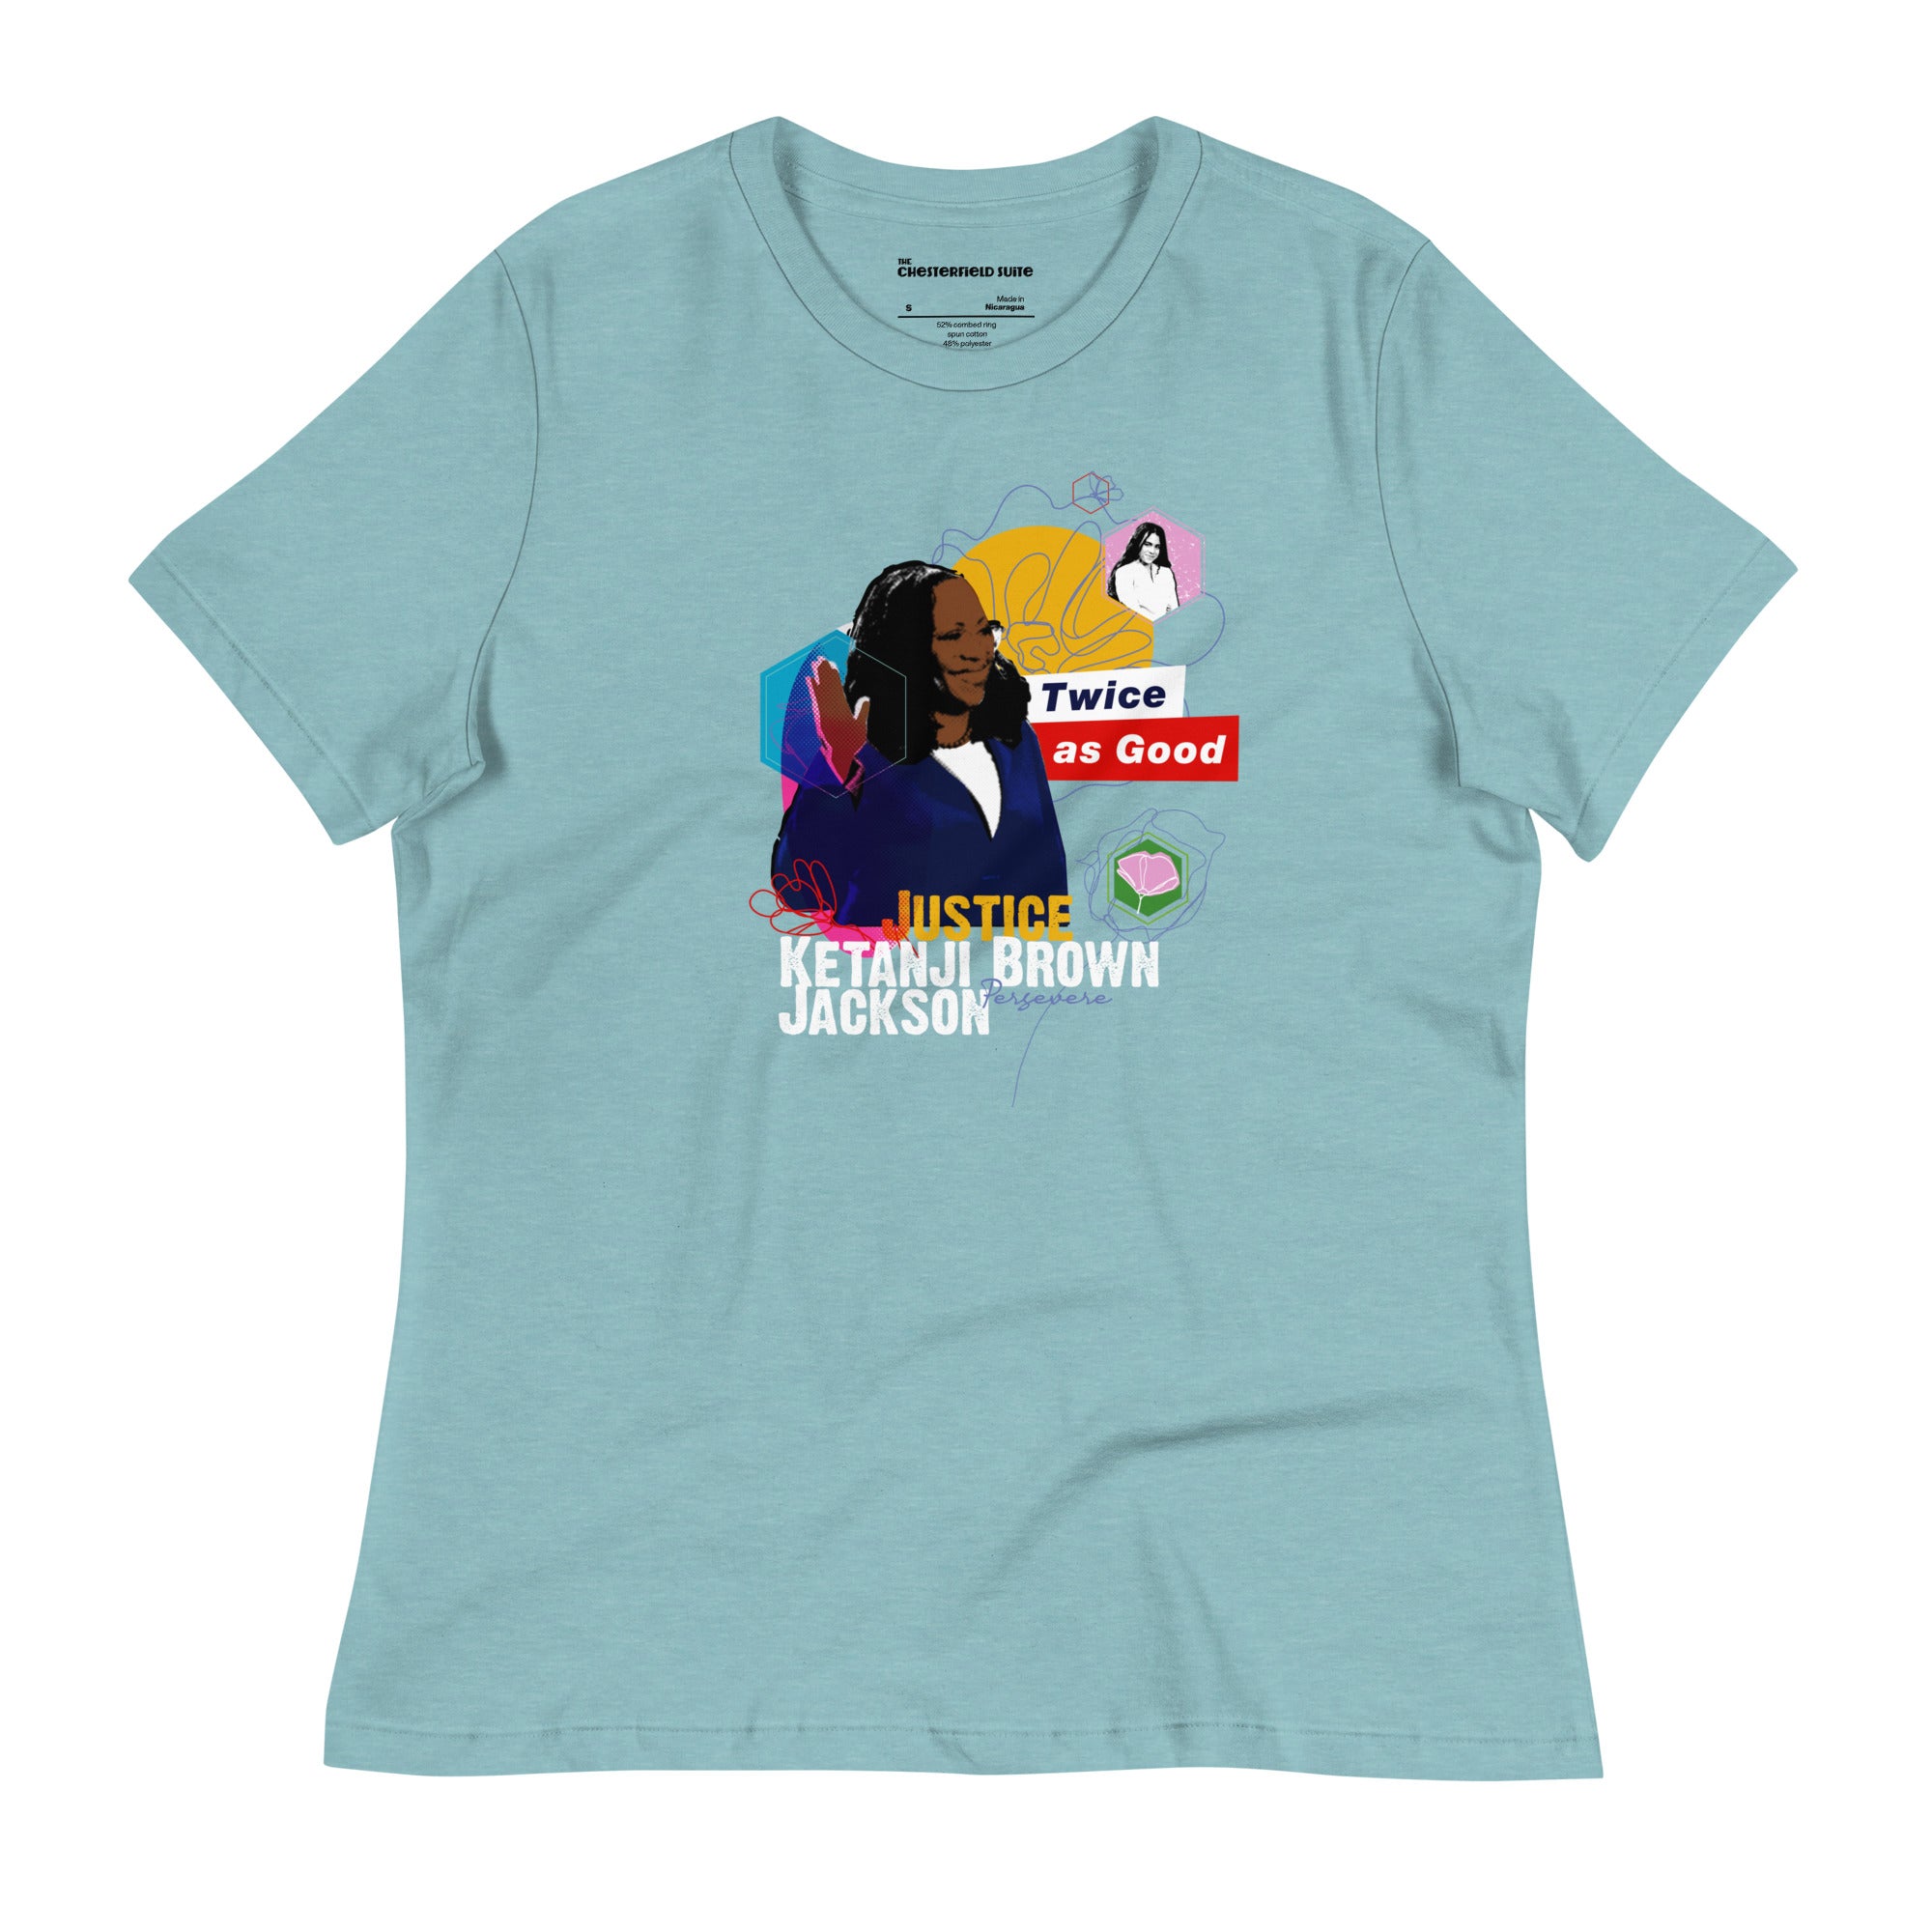 design with light blue t-shirt of justice ketanji brown jackson, her daughter and the phrase "twice as good"